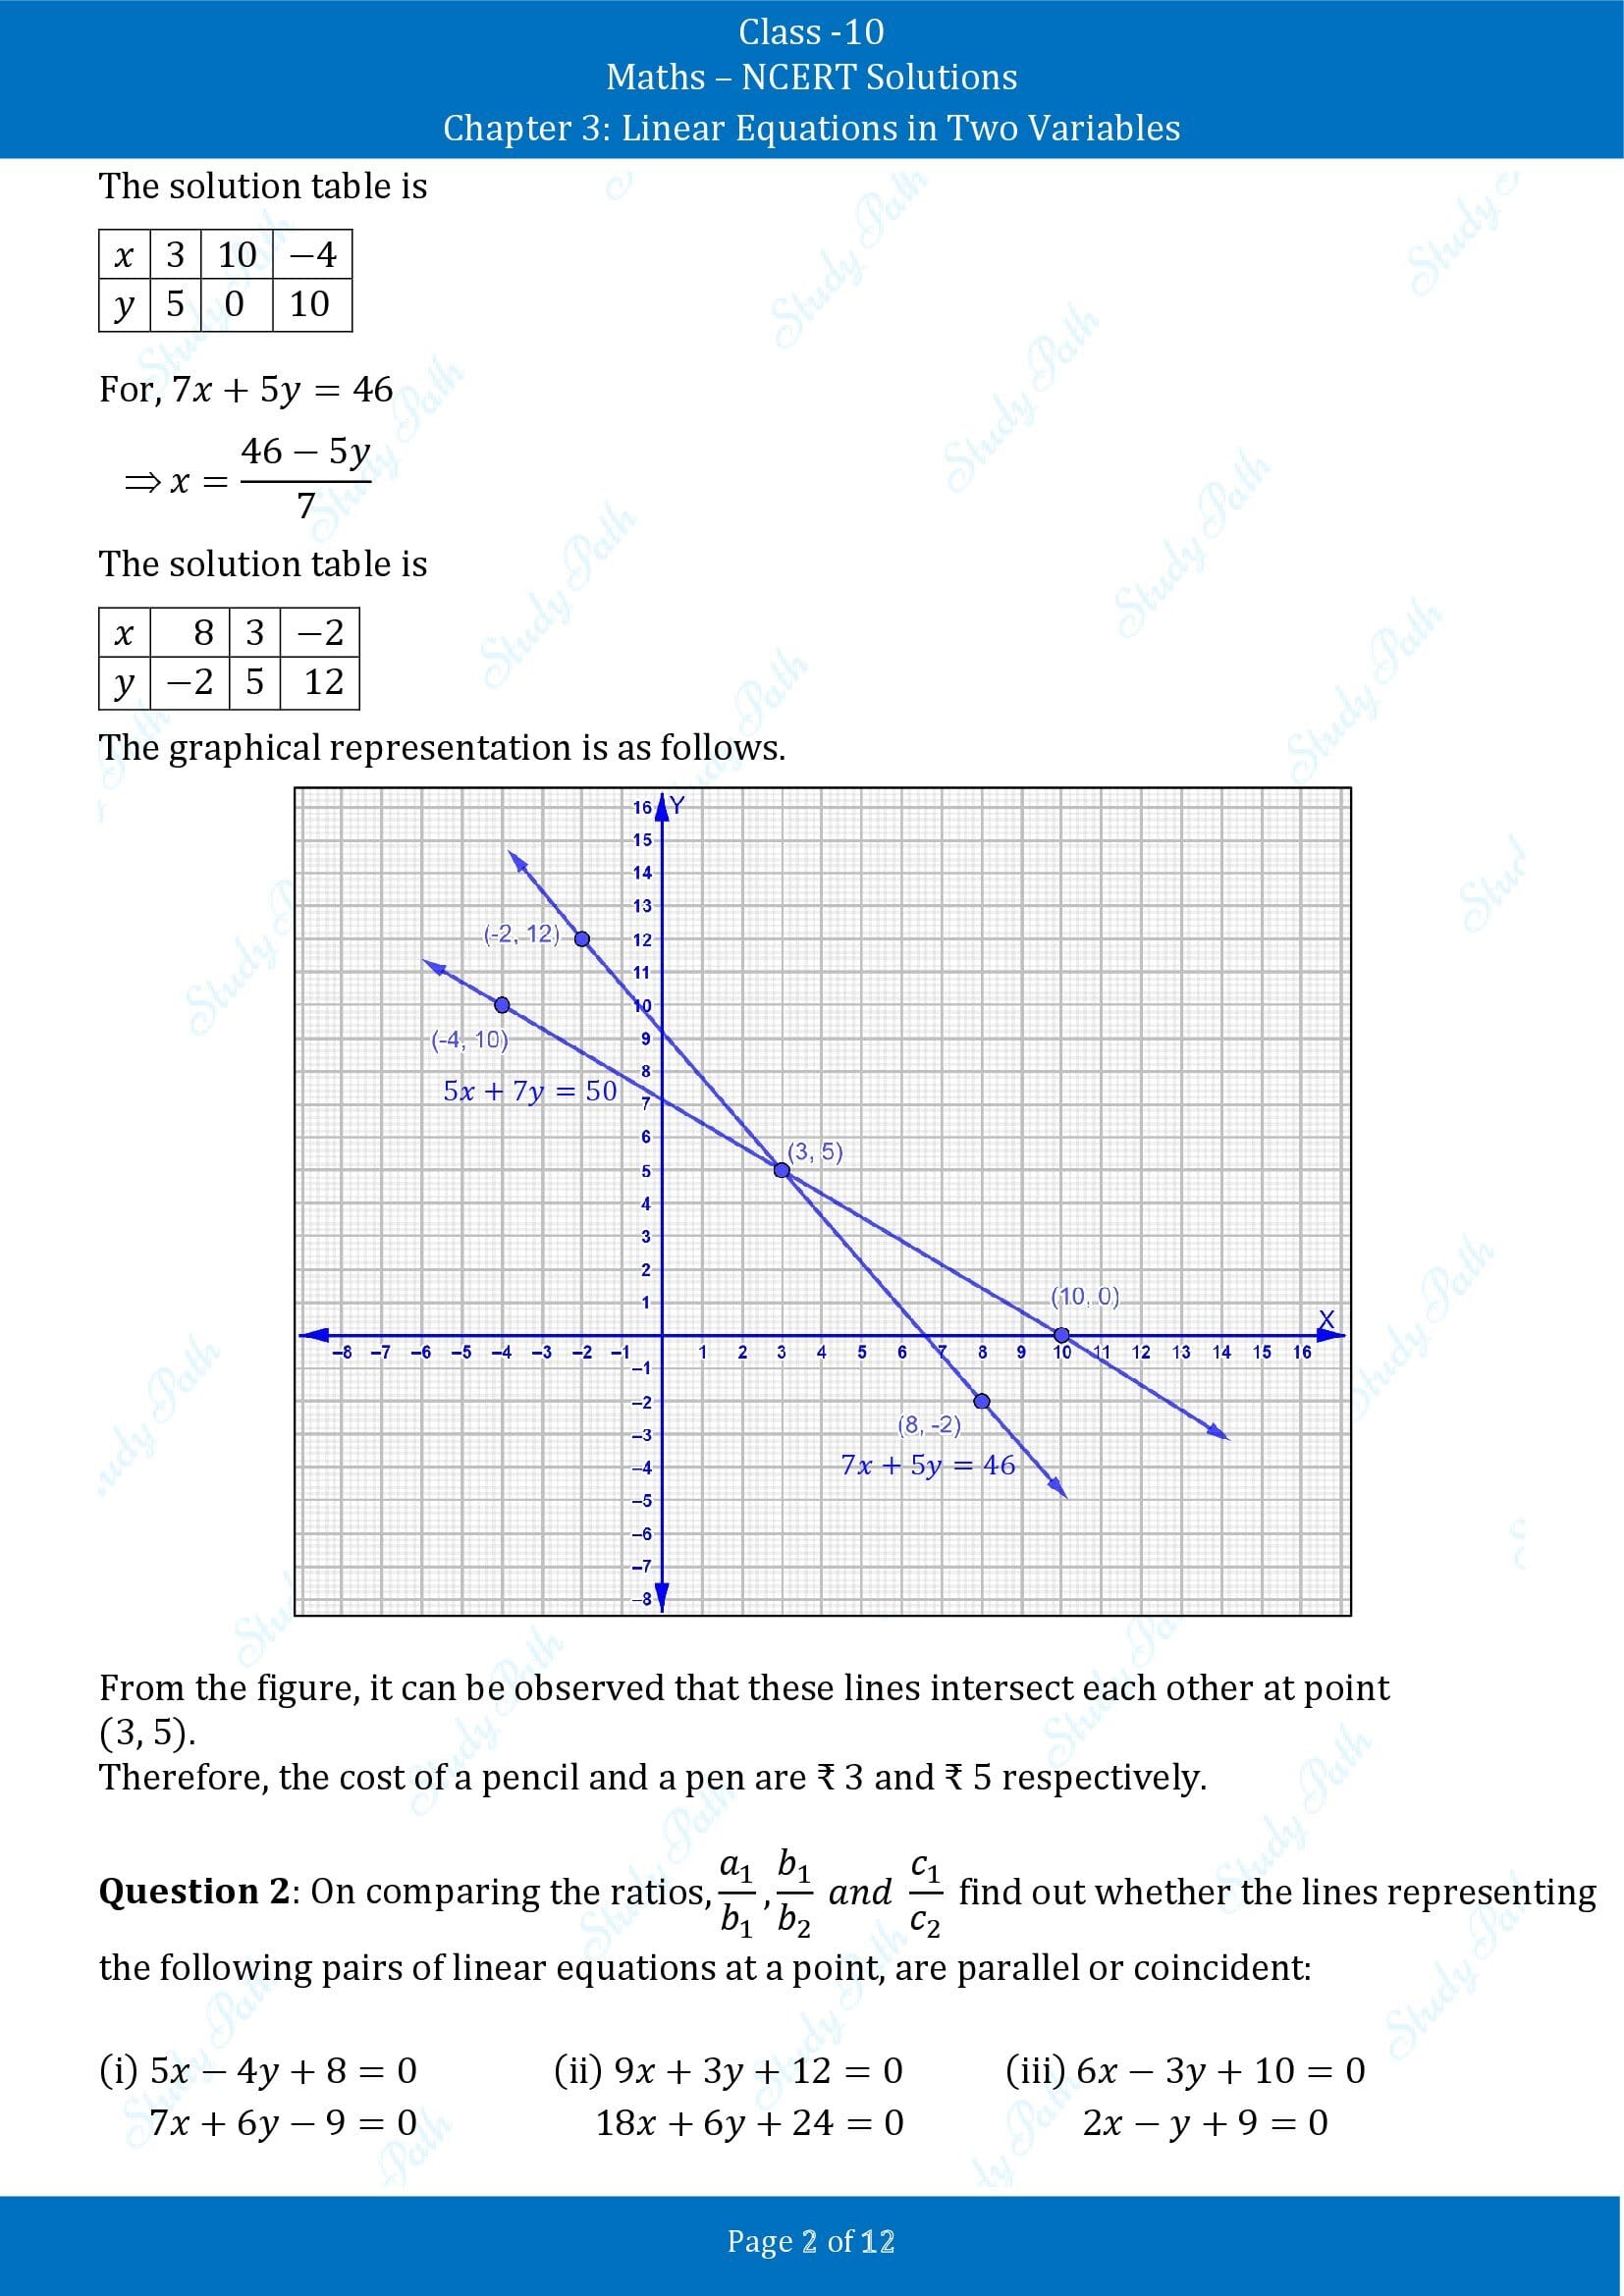 NCERT Solutions for Class 10 Maths Chapter 3 Linear Equations in Two Variables Exercise 3.2 00002